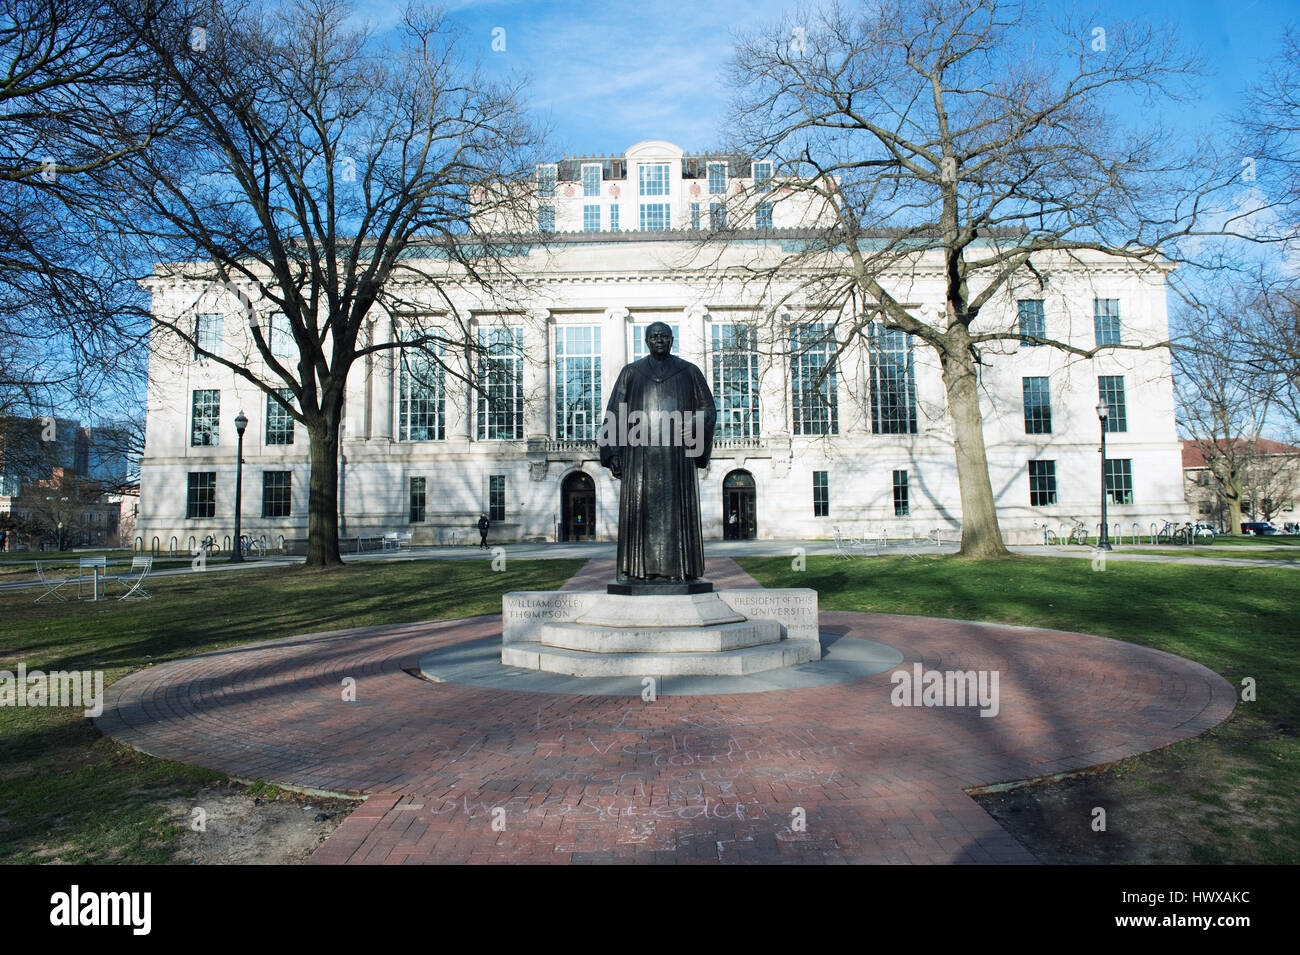 March 23, 2017: The Ohio State University Library at the Ohio State University. Columbus, Ohio. Brent Clark/Alamy Live News Stock Photo